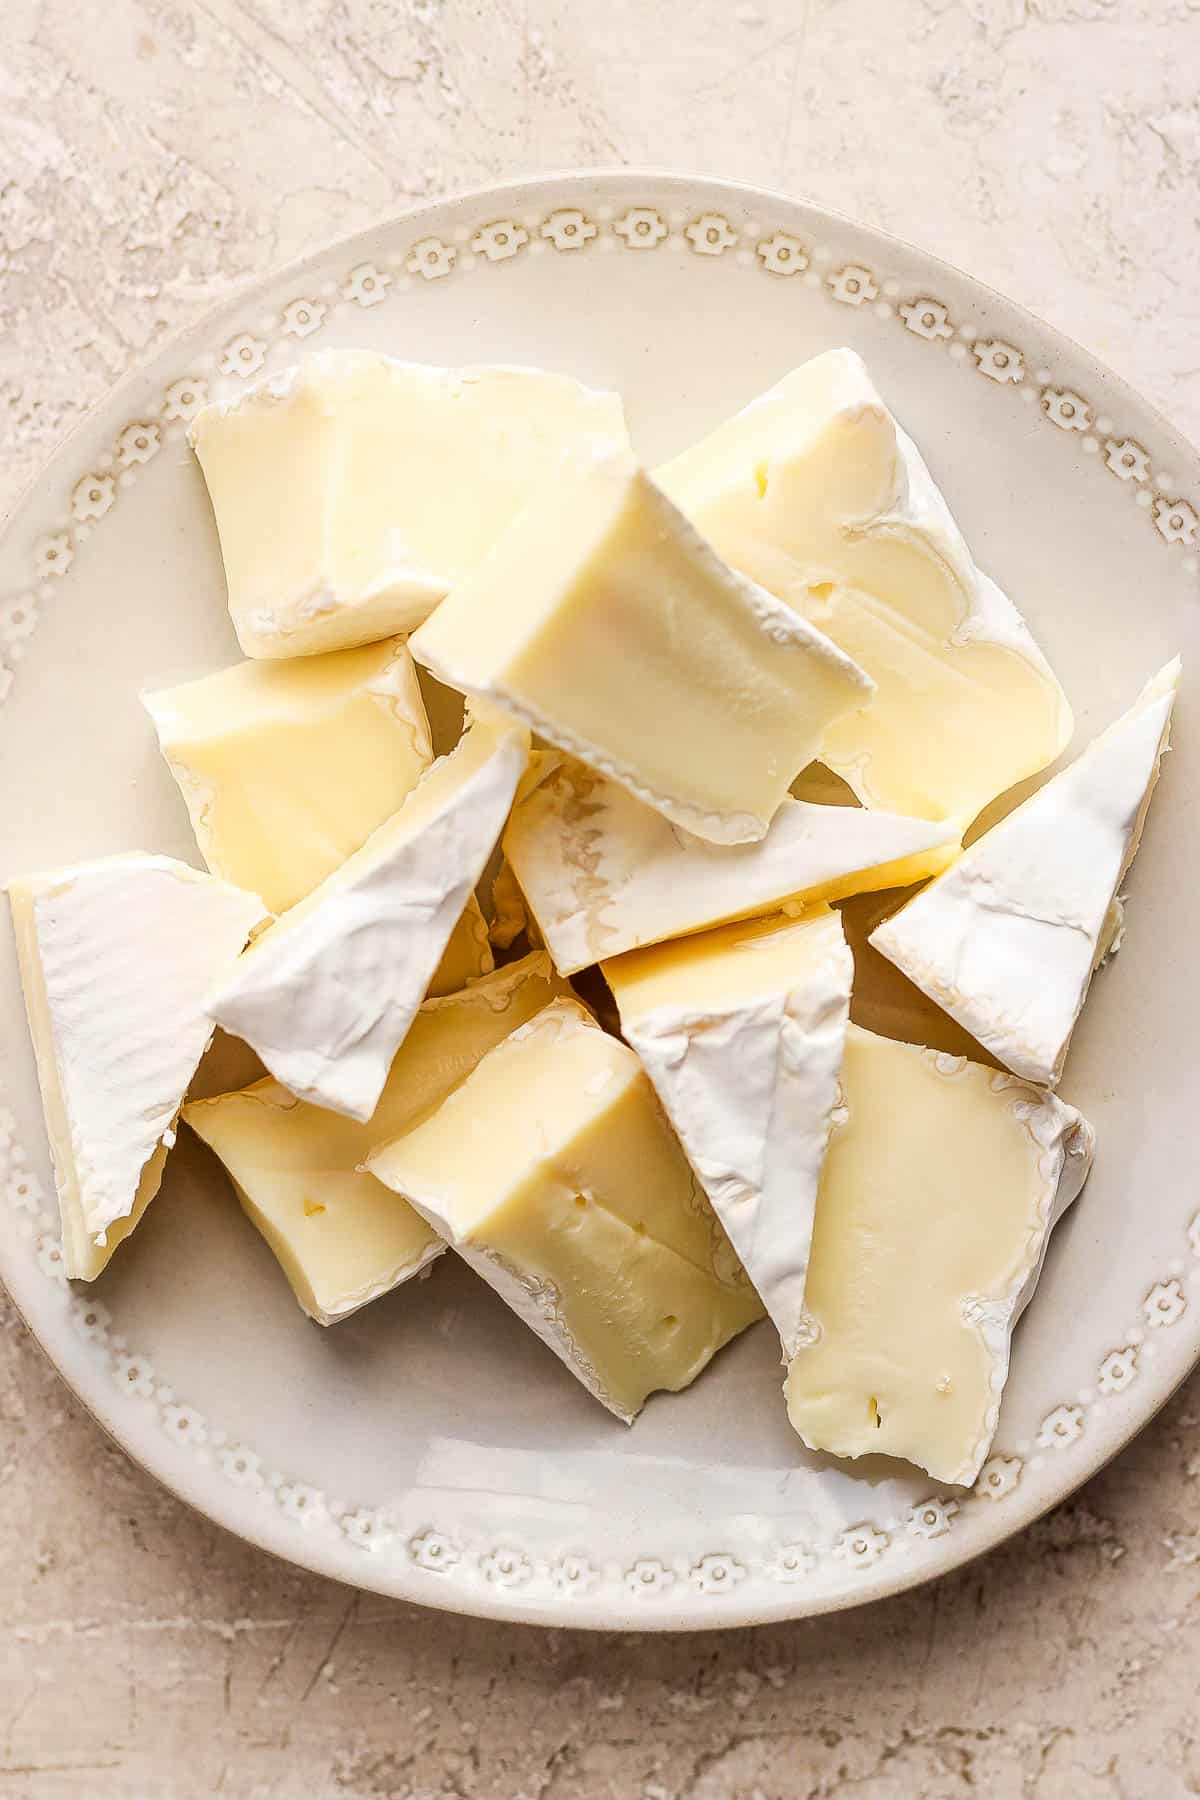 12 wedges of brie cheese on a plate.